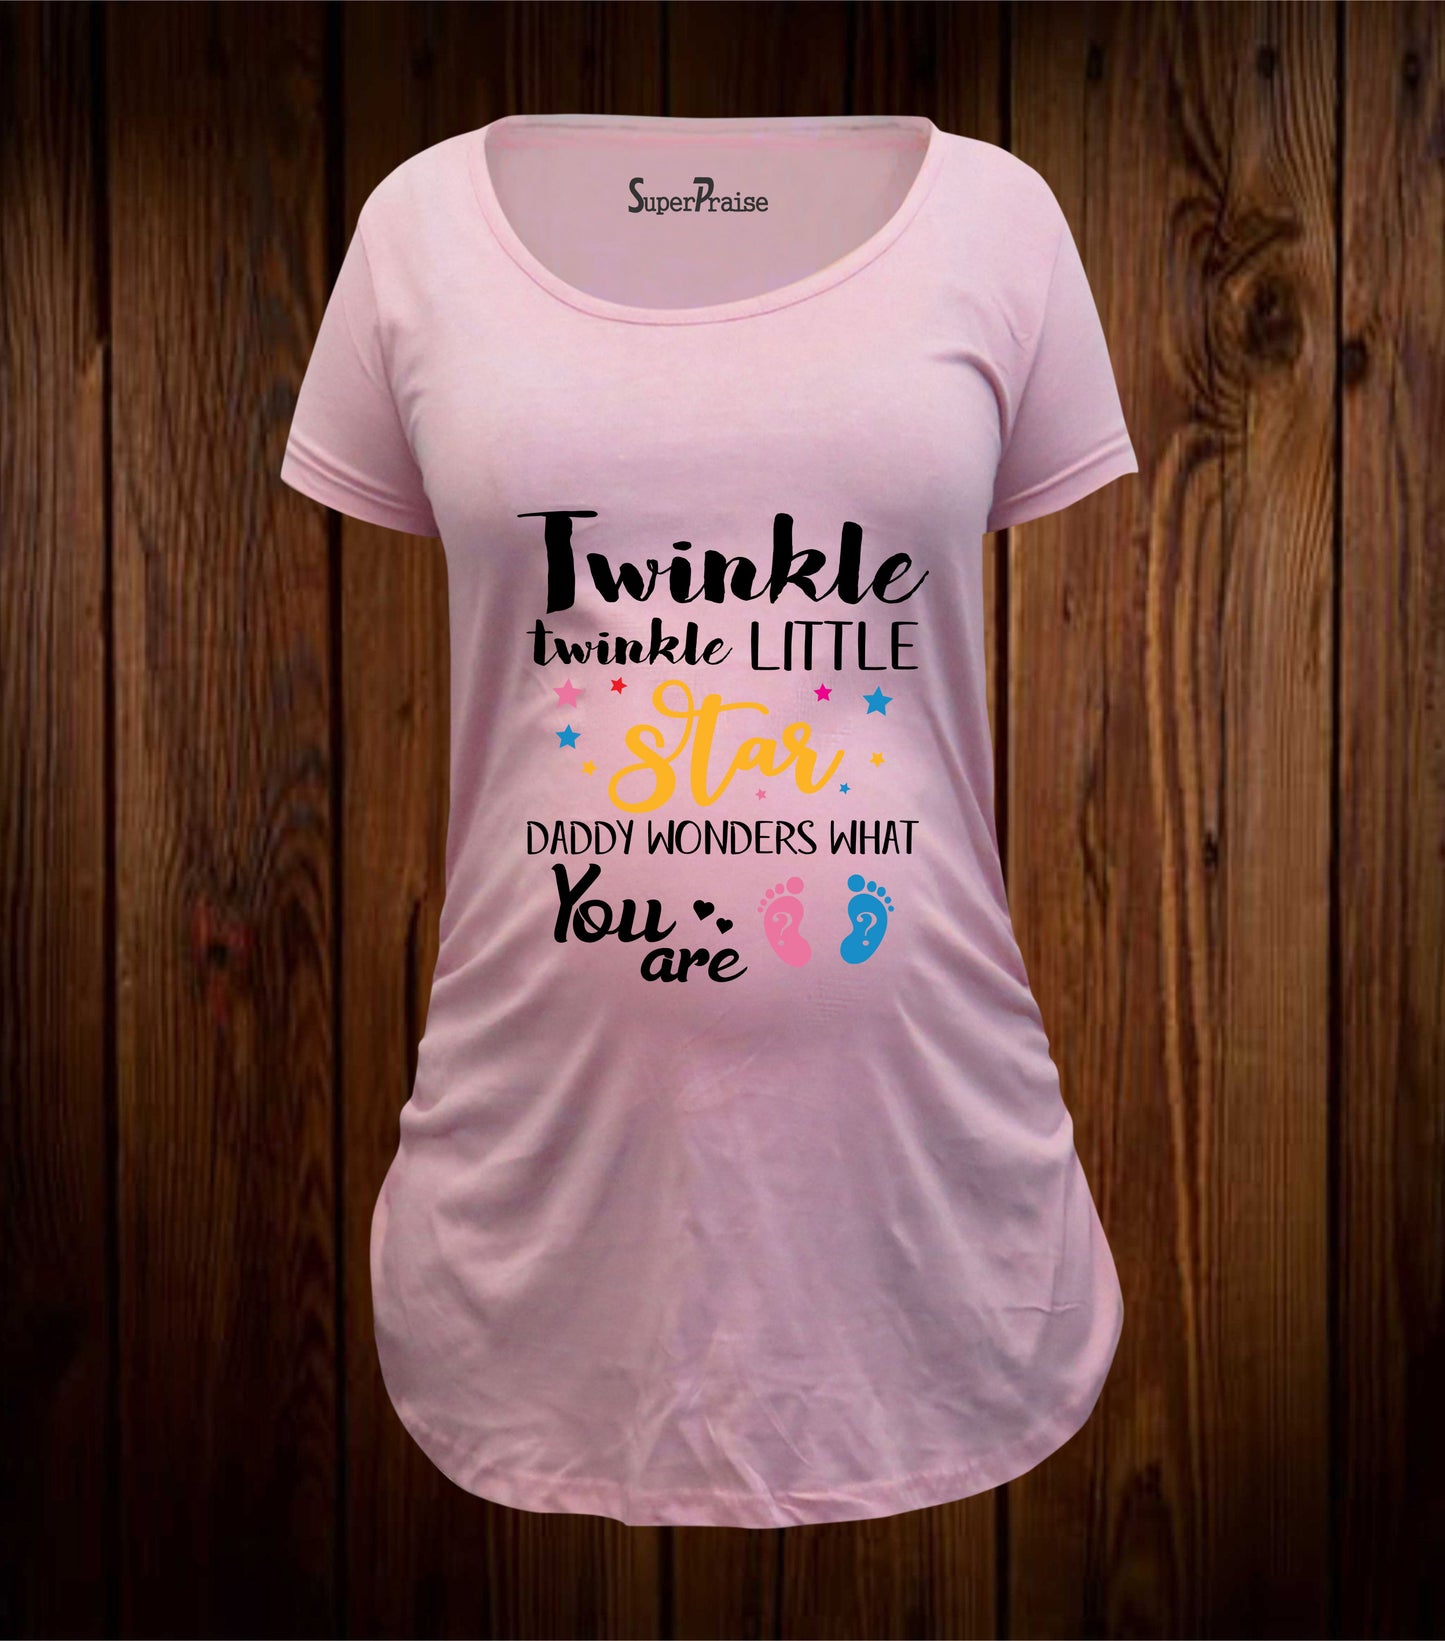 Twinkle Twinkle Little Star Daddy Wonders What You Are Maternity T Shirt